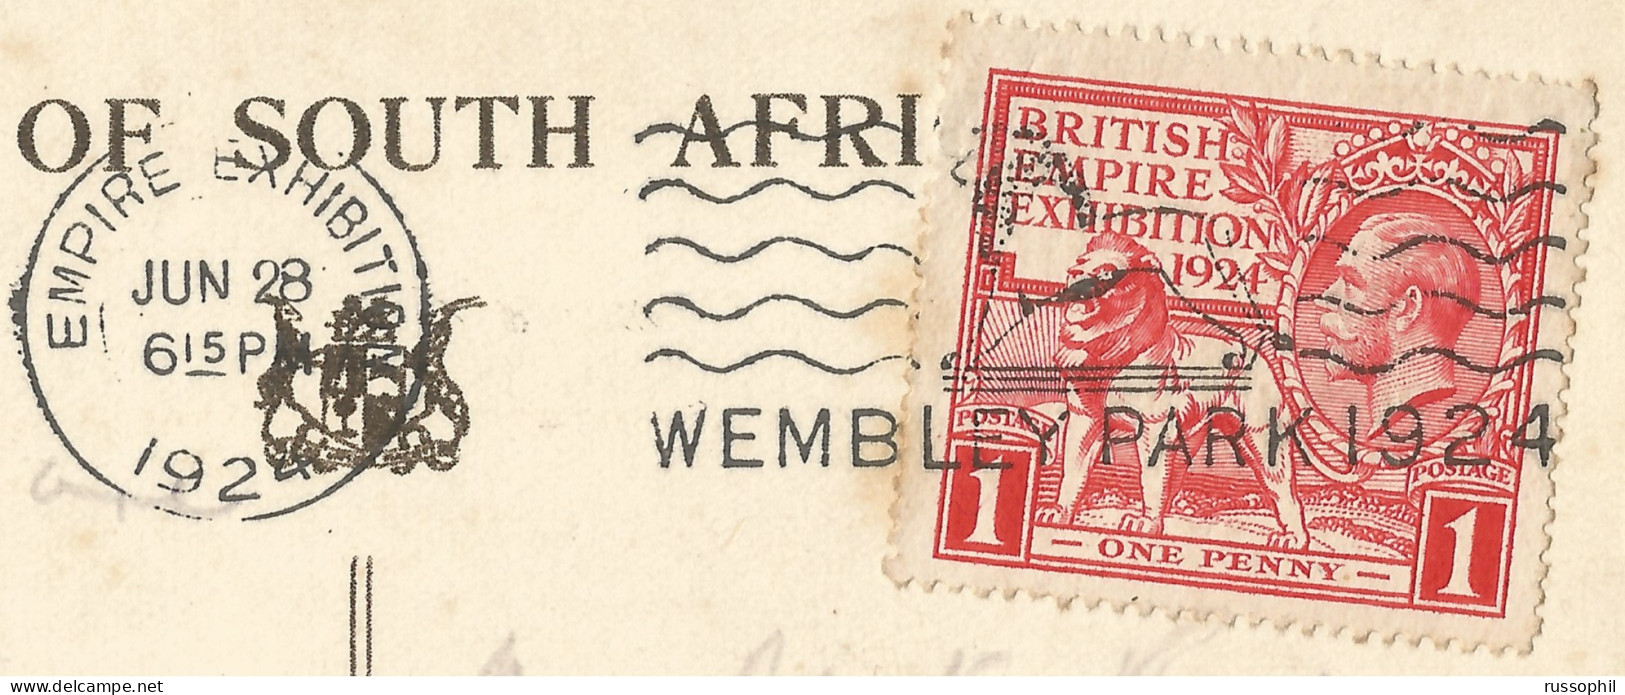 UK - "ONE PENNY BRITISH EMPIRE EXHIBITION 1924" ALONE FRANKING PC TO PORTSMOUTH -1924 - Lettres & Documents